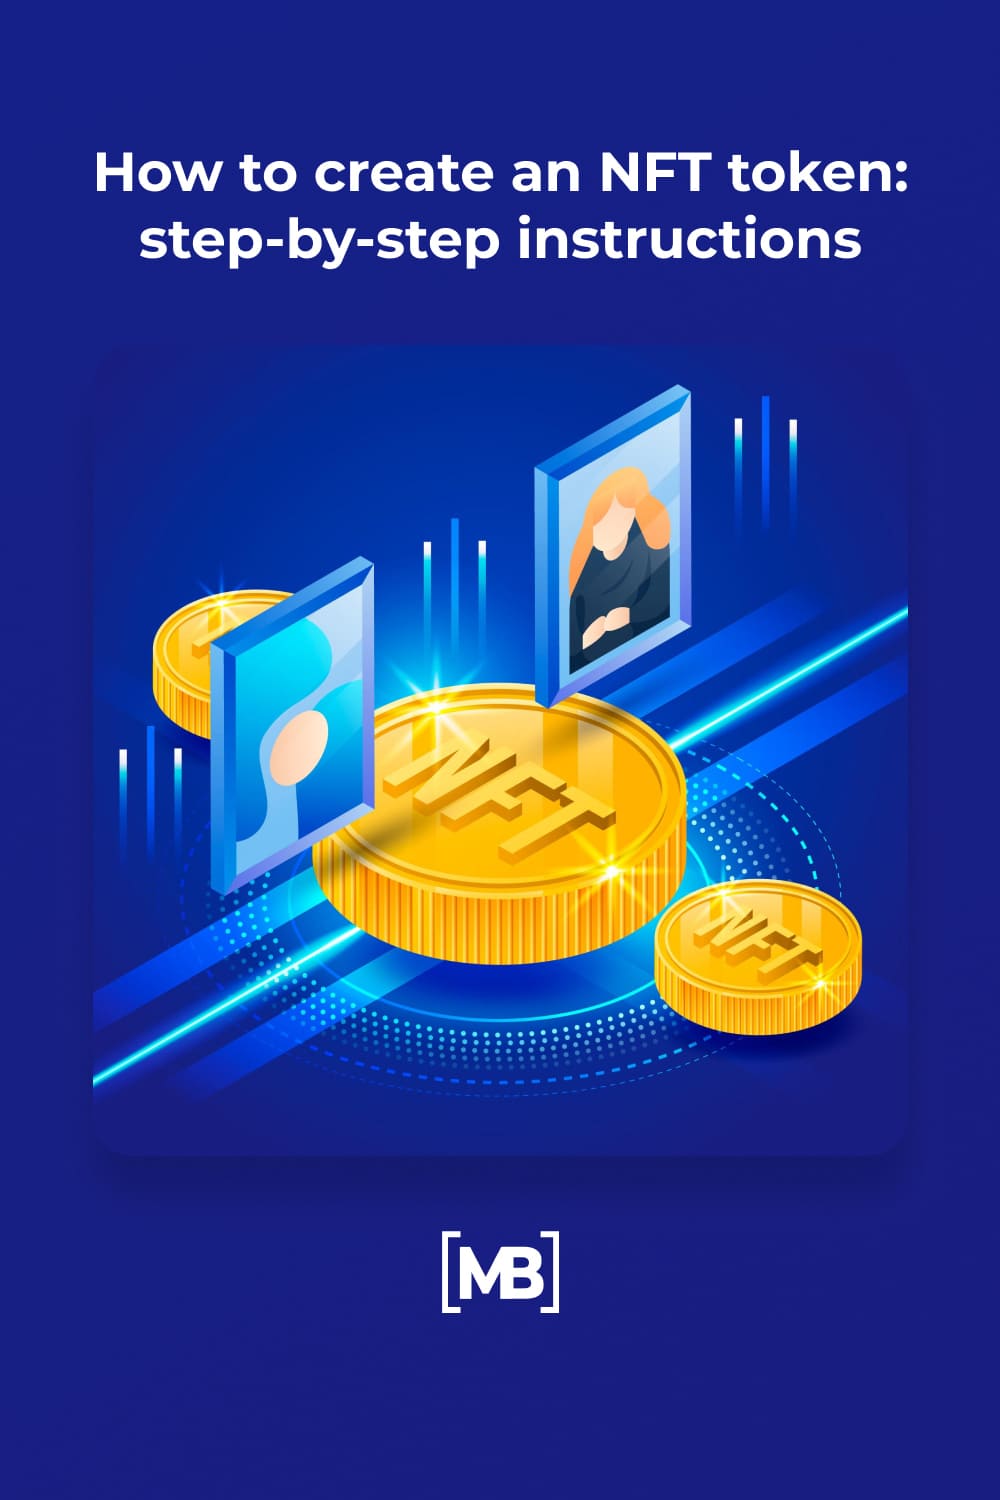 3 How to create an NFT token step by step instructions